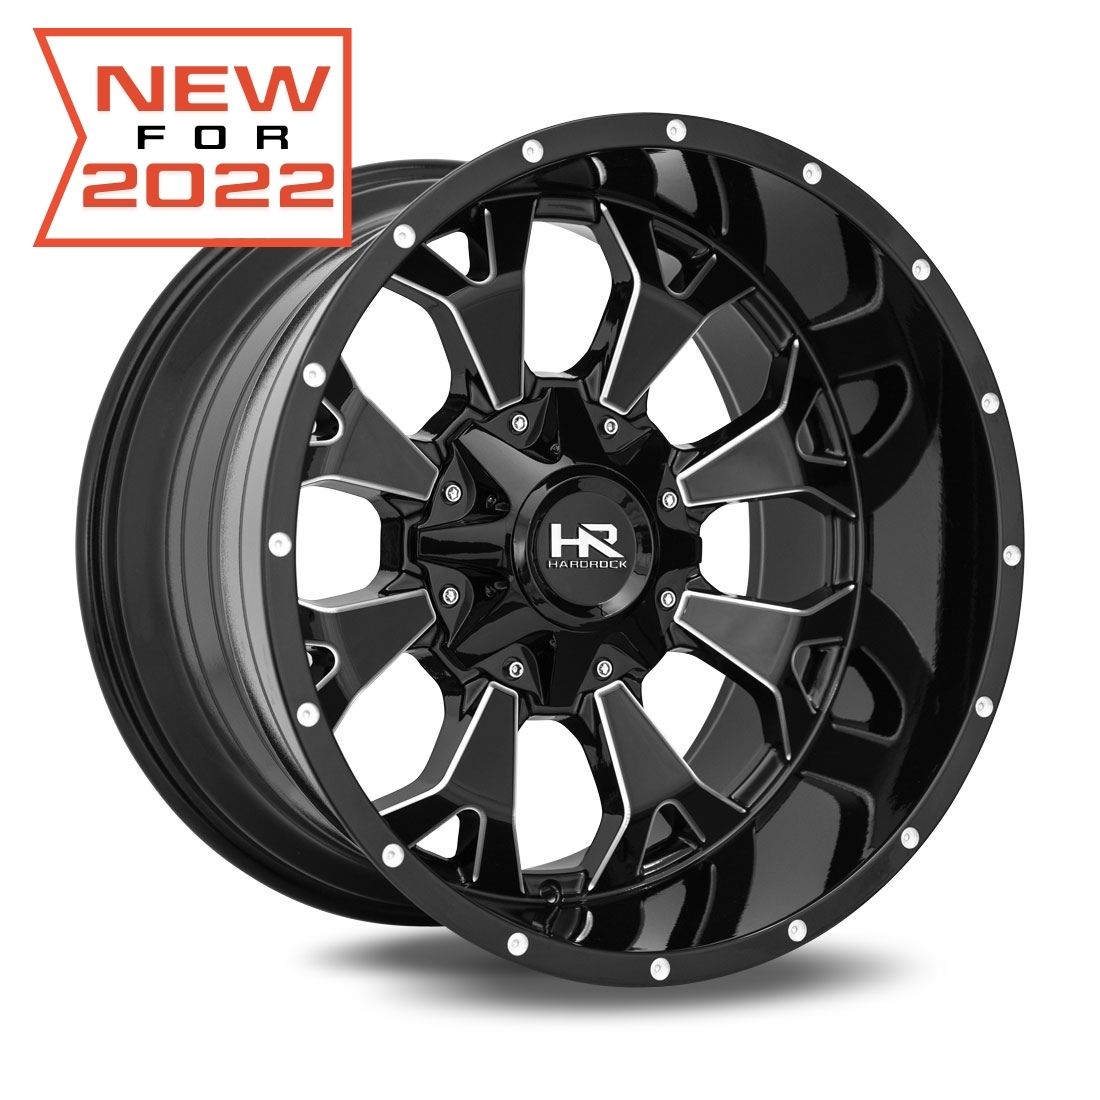 Hardrock Offroad H711 New For 2022